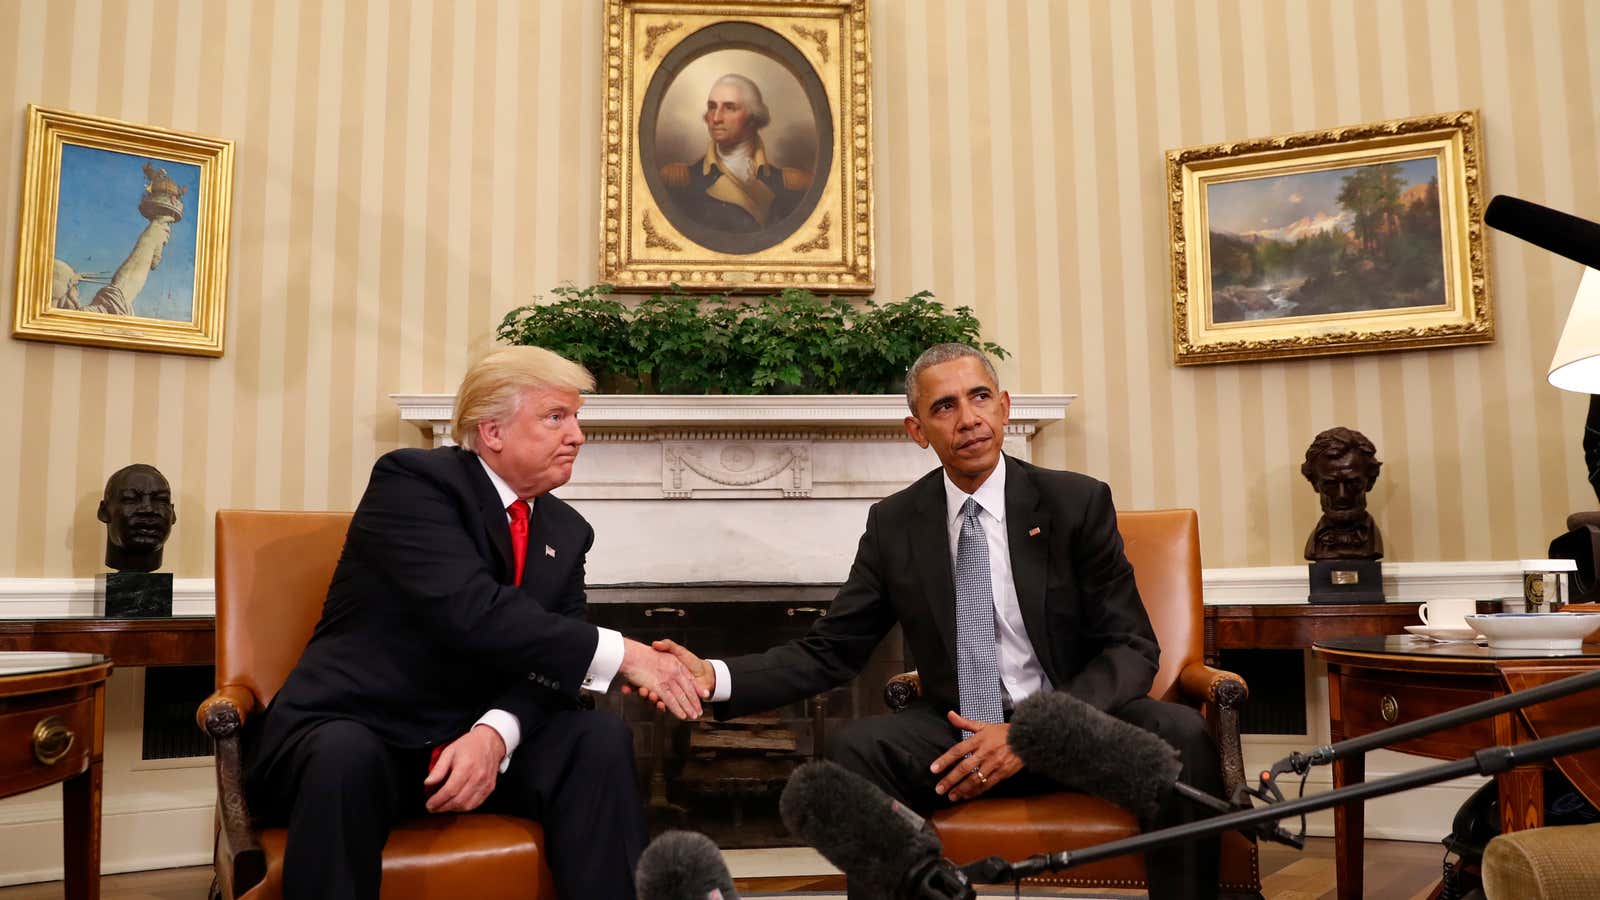 President Barack Obama shakes hands with President-elect Donald Trump in the Oval Office.